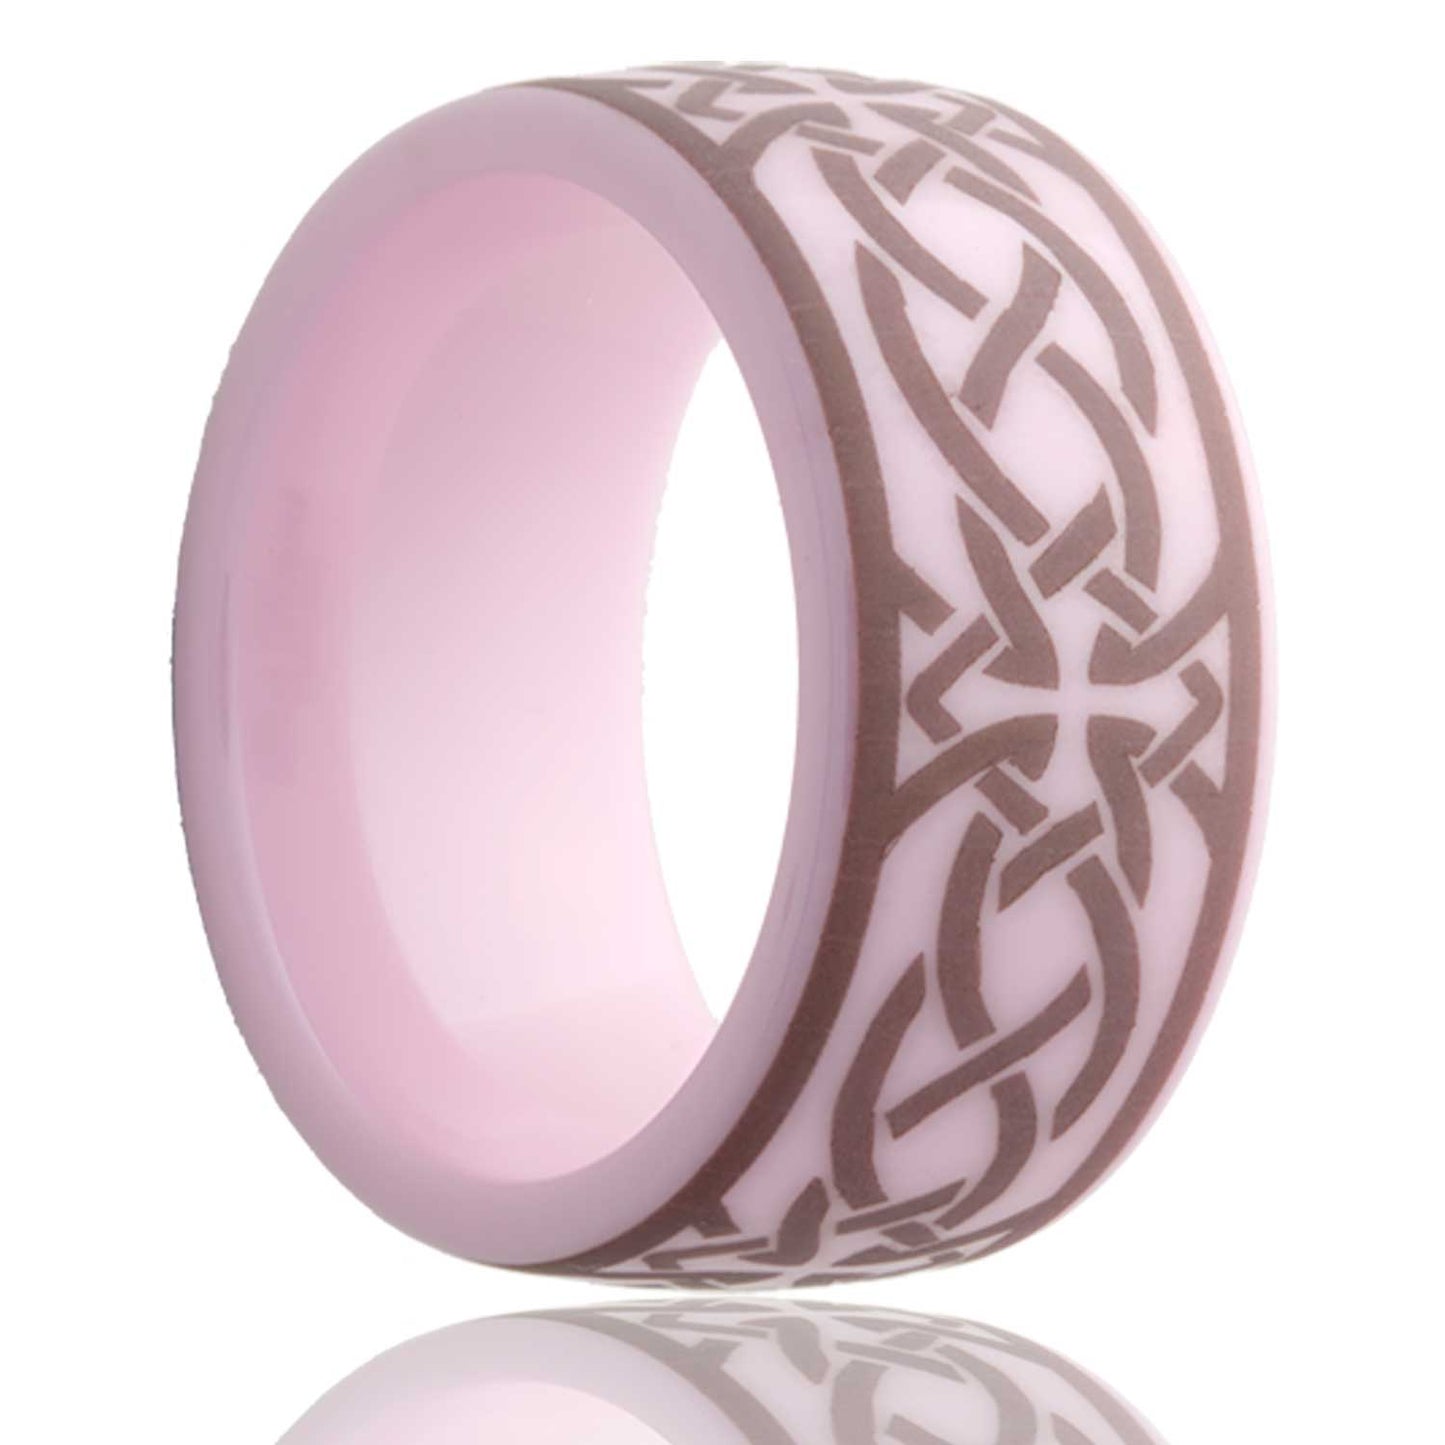 A celtic cross knot domed pink ceramic men's wedding band displayed on a neutral white background.